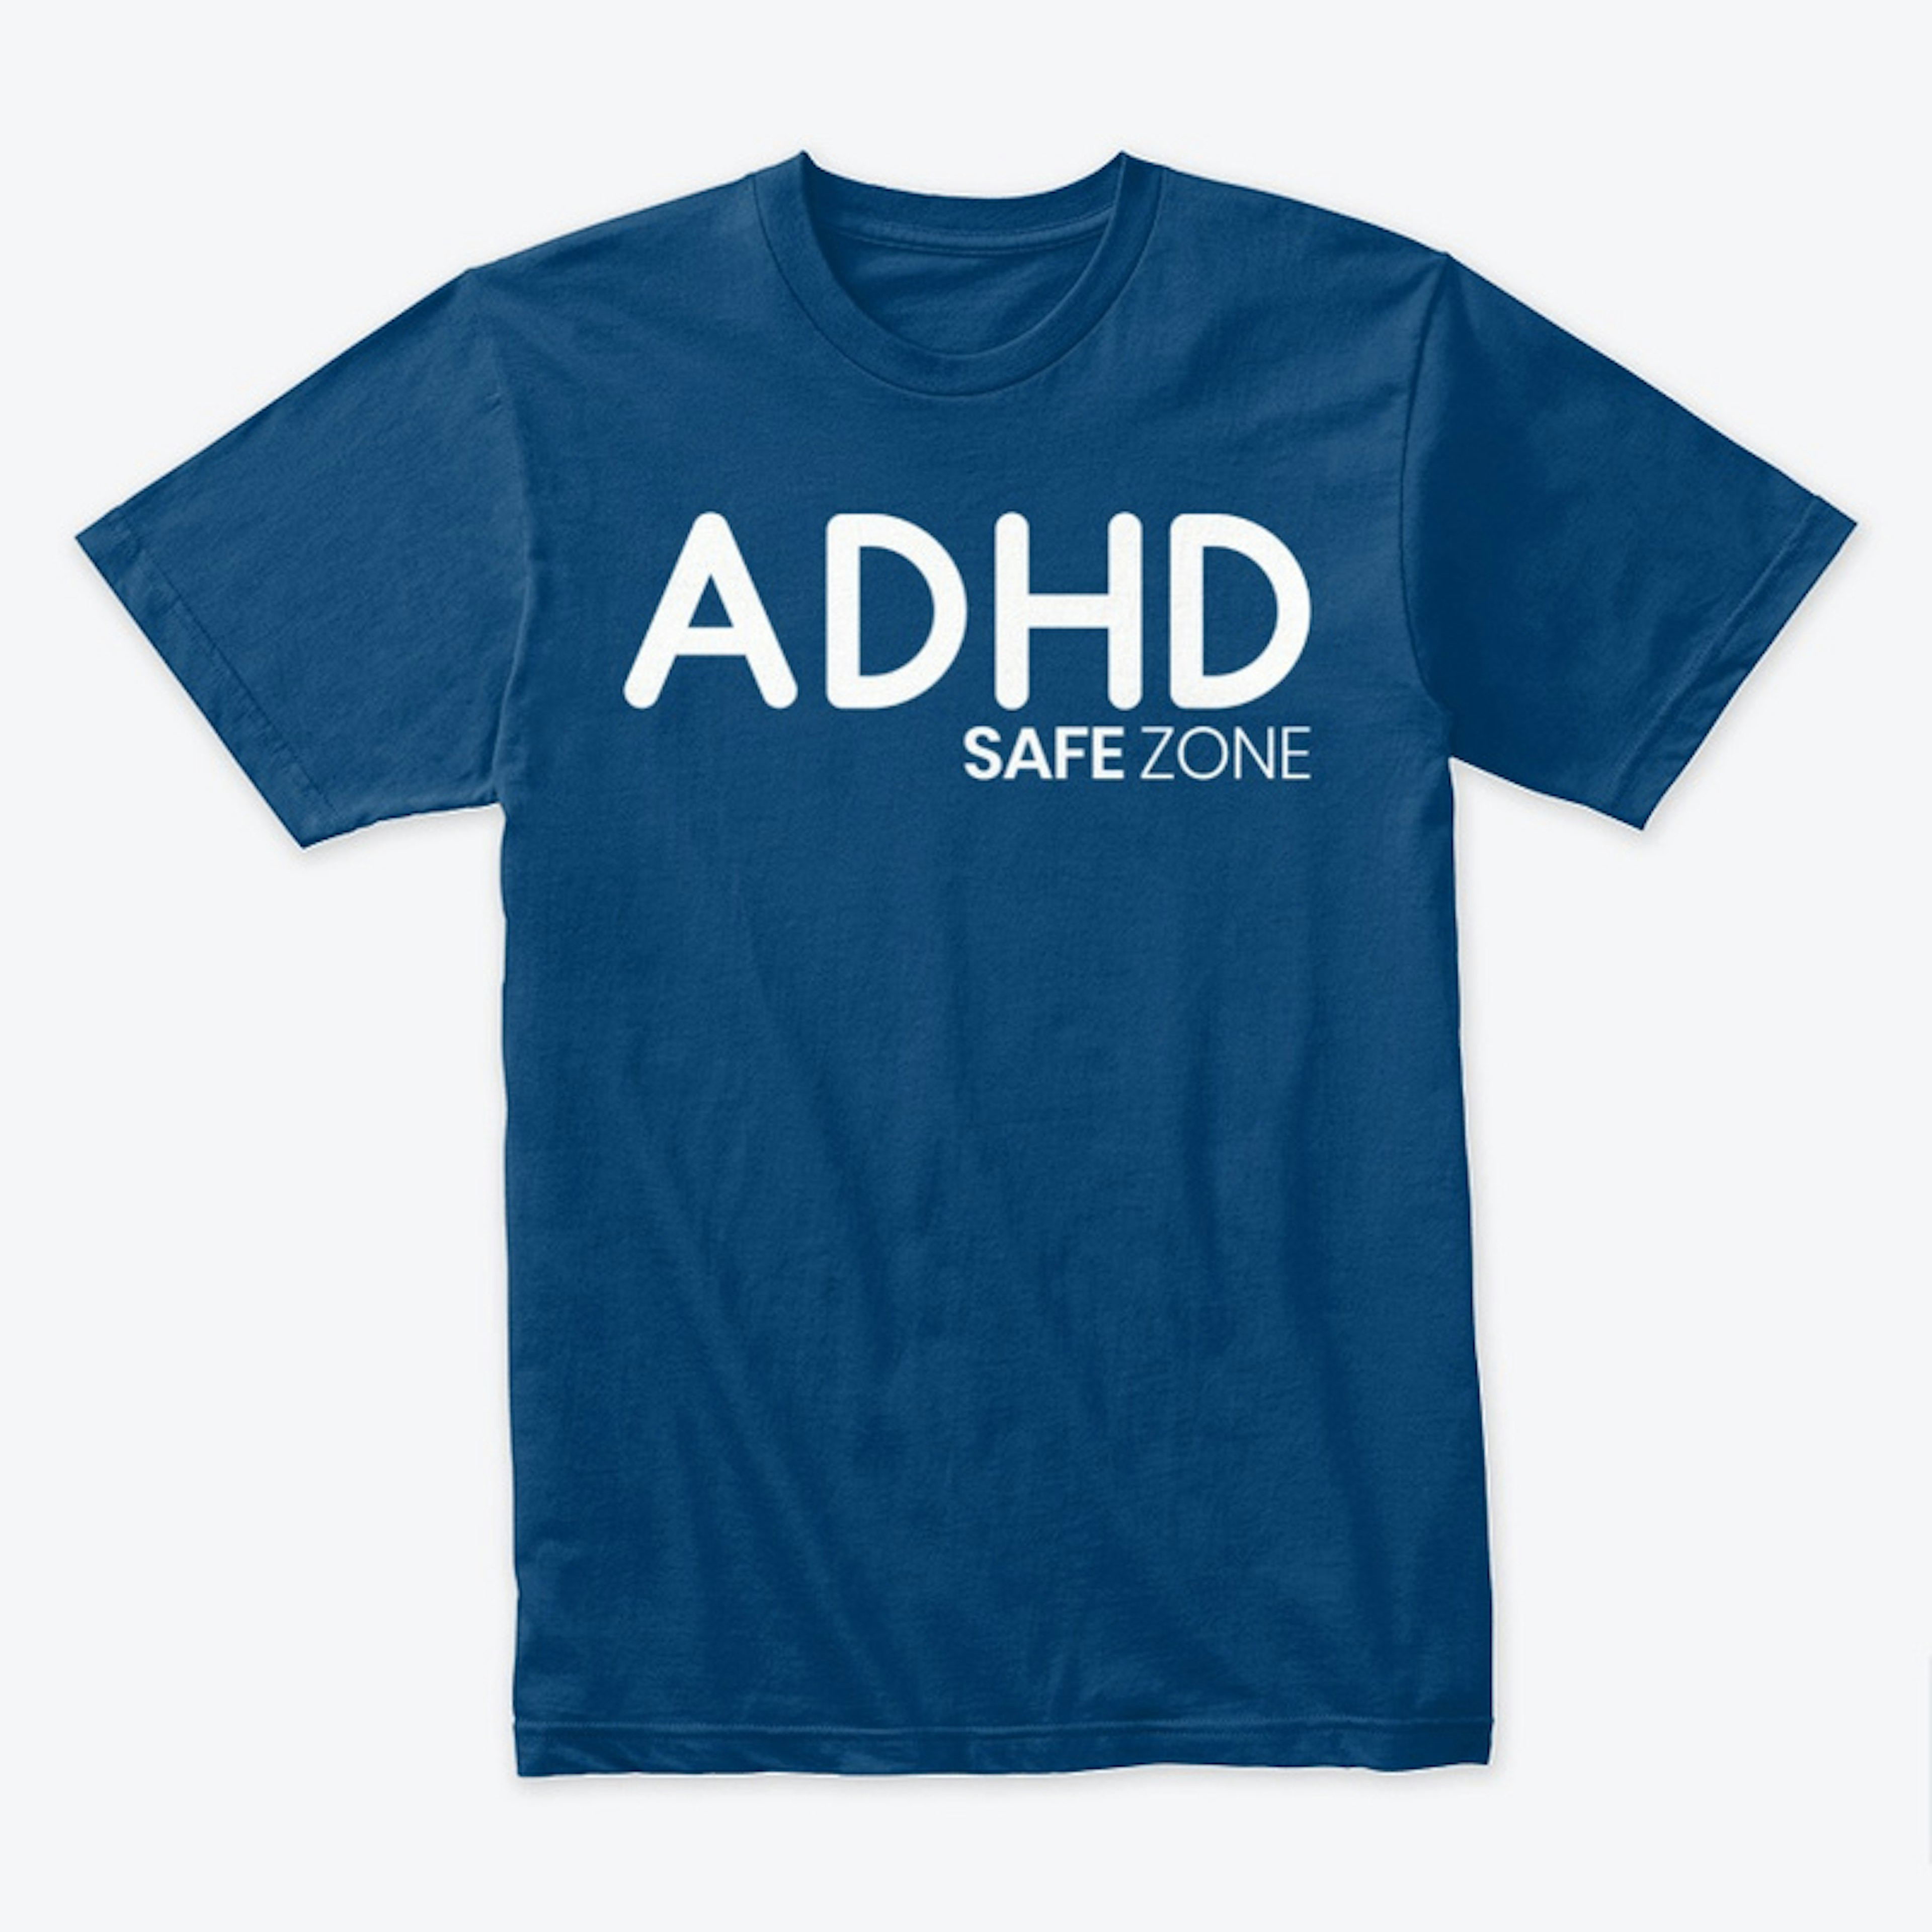 The ADHD Safe Zone Mens T-Shirt